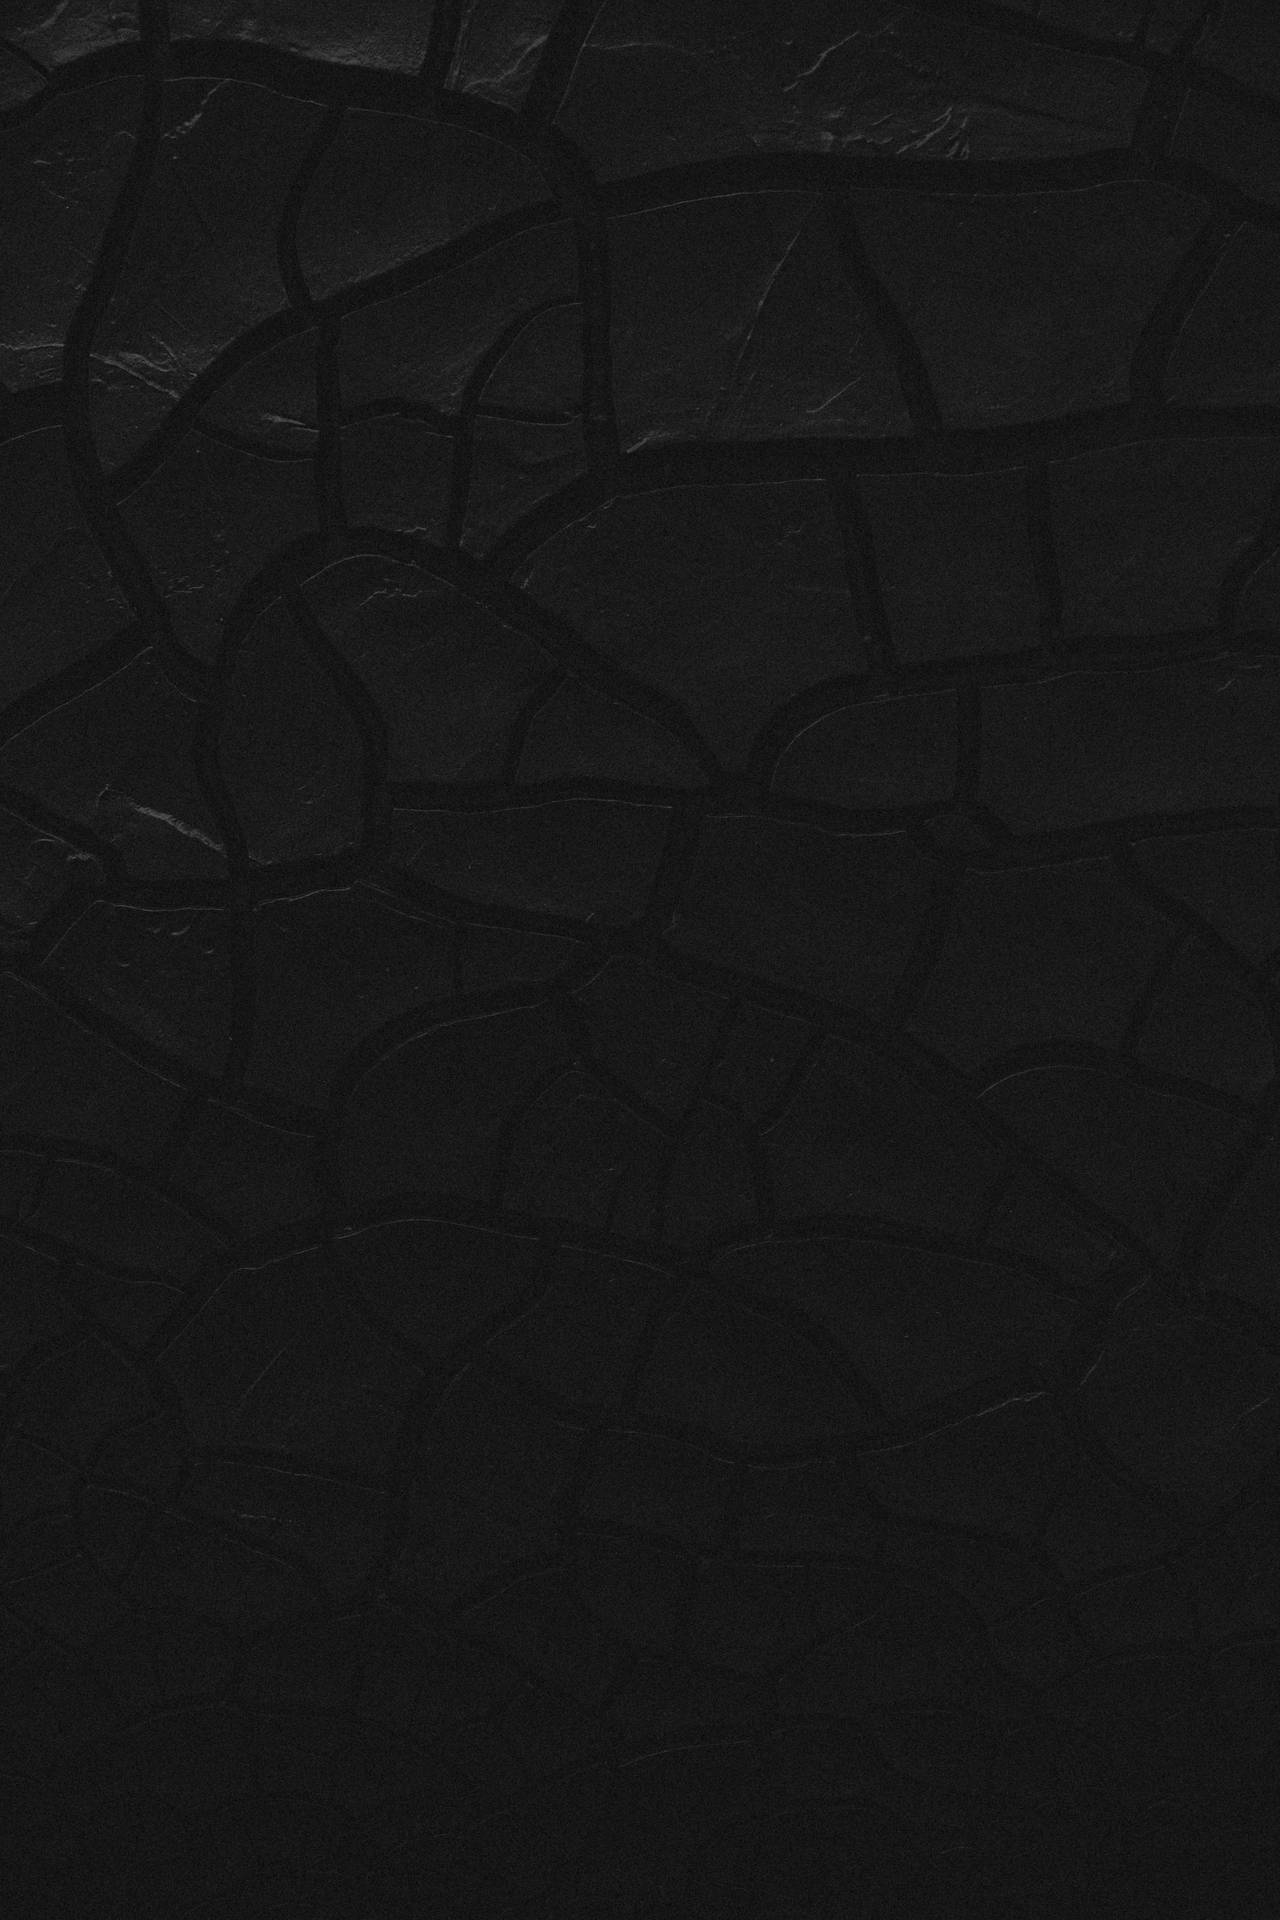 Plain Black With Cracked Surface